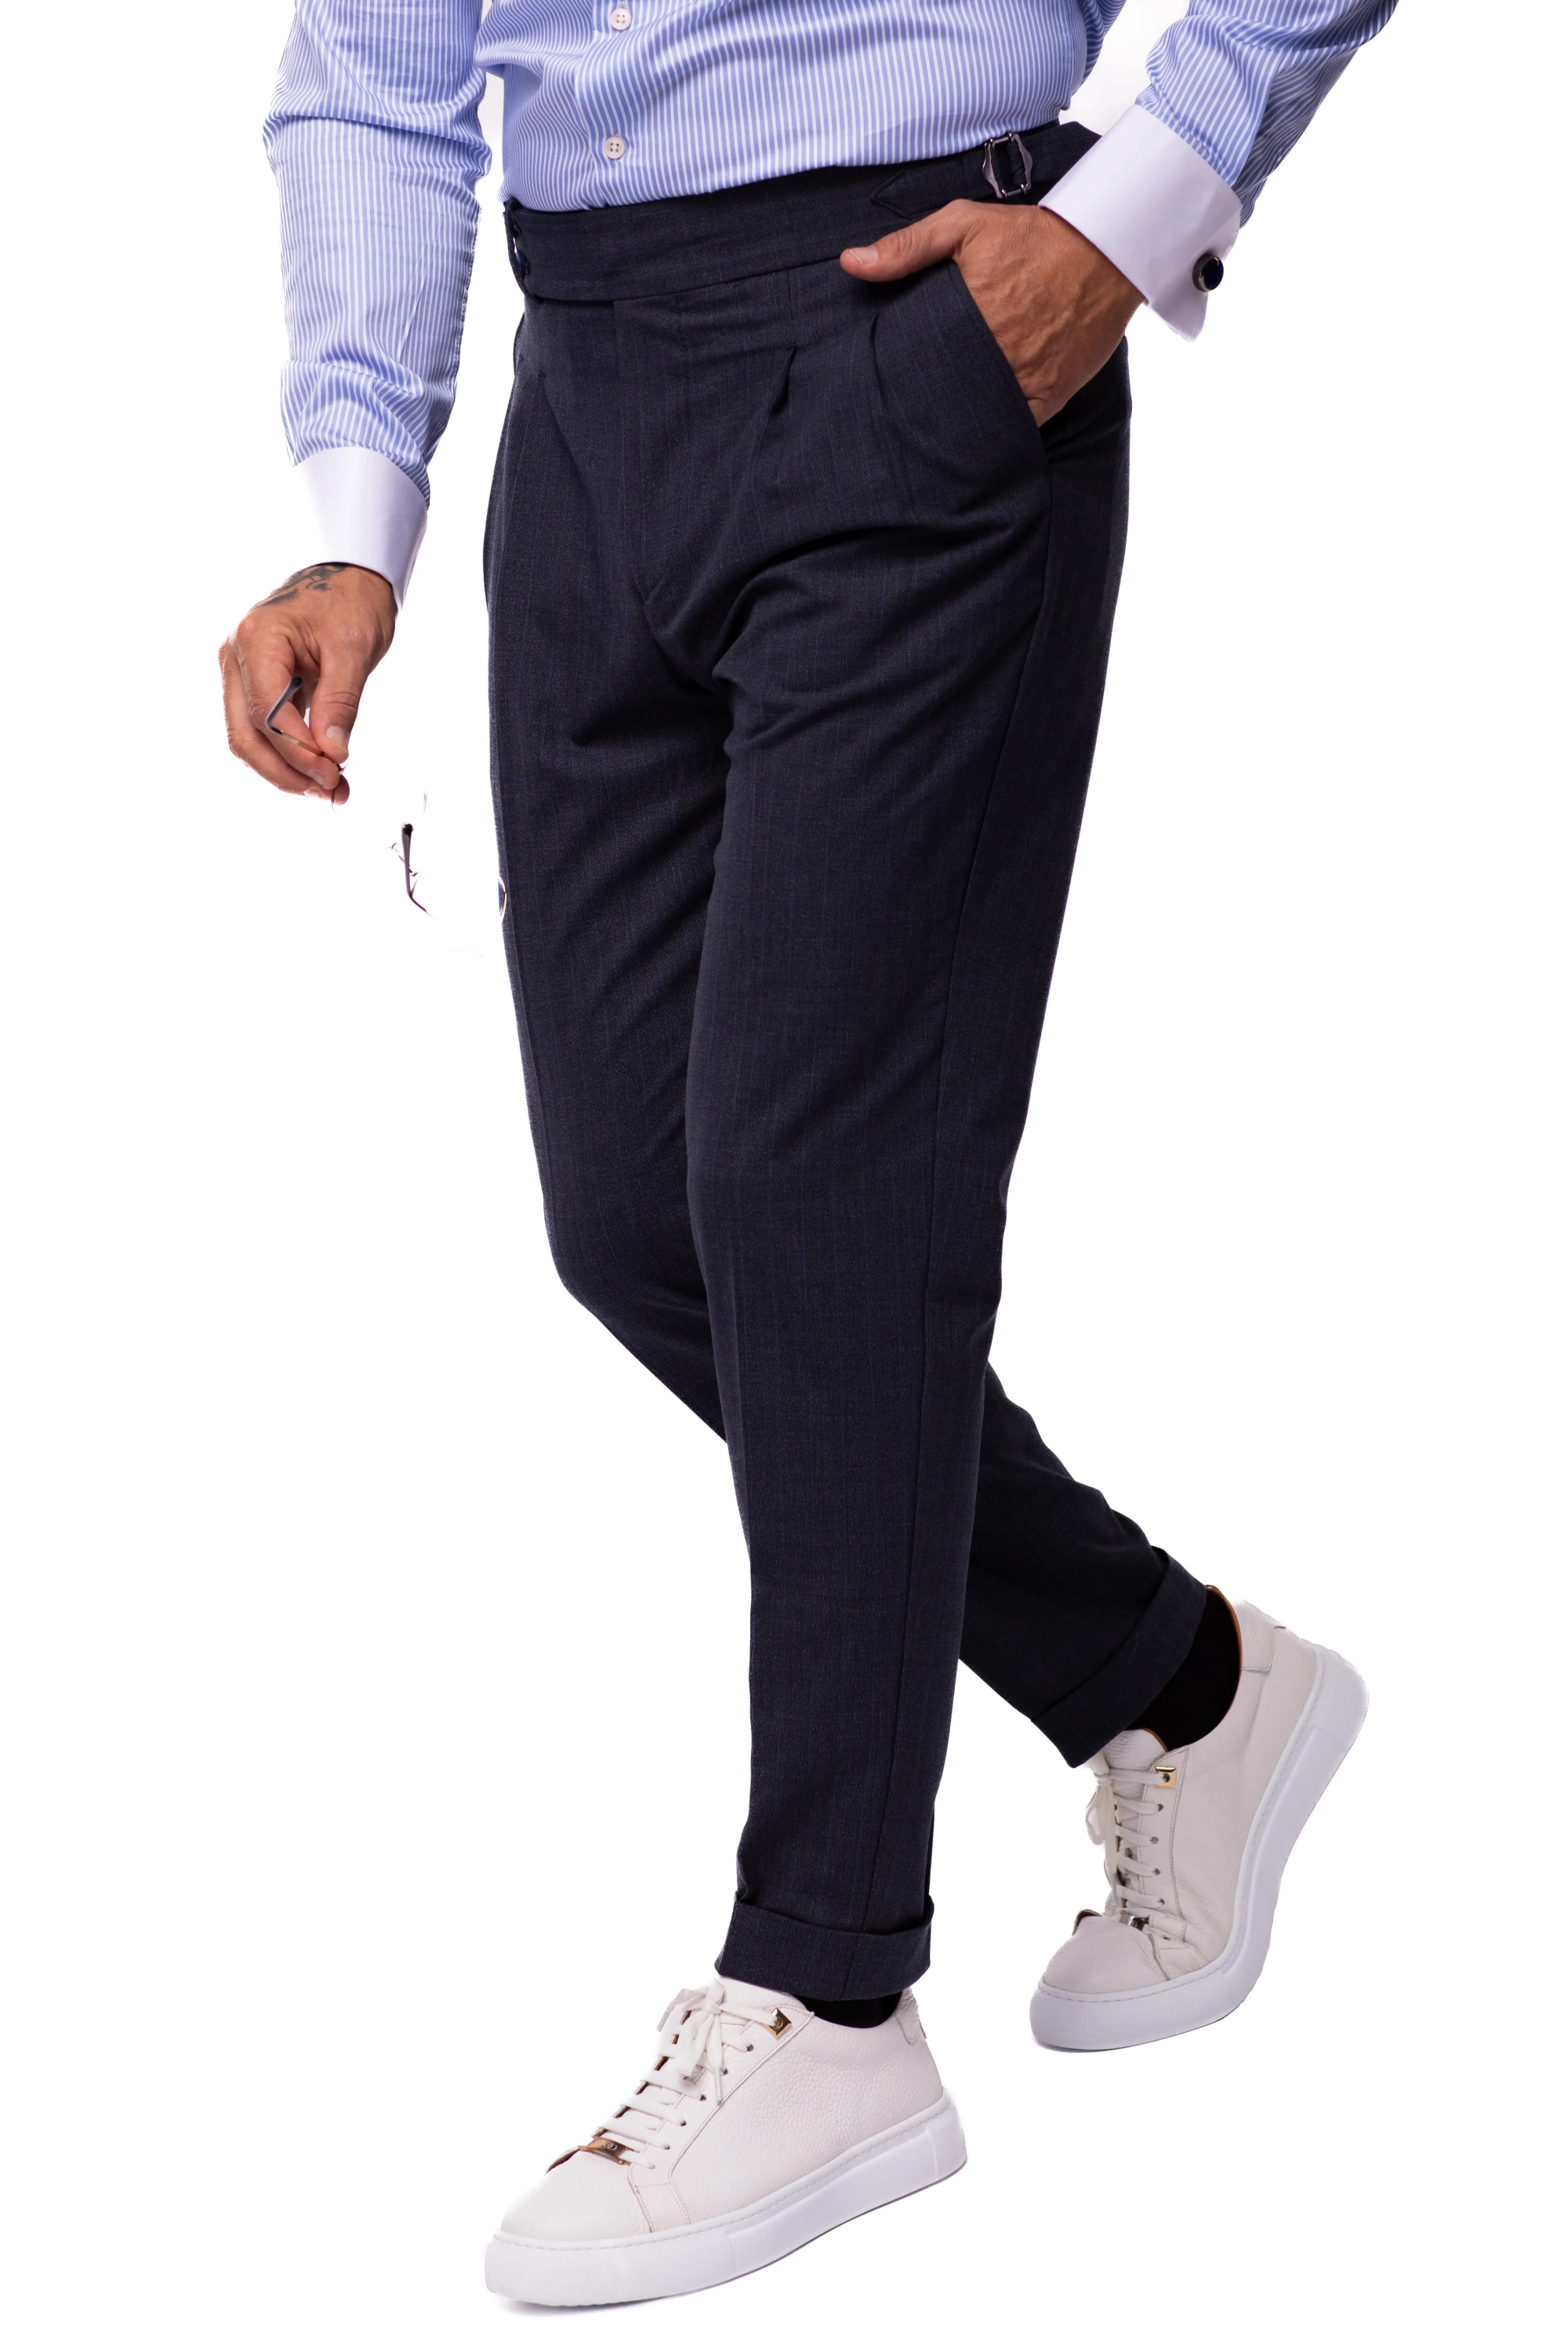 Shantung trousers with dark blue stripes